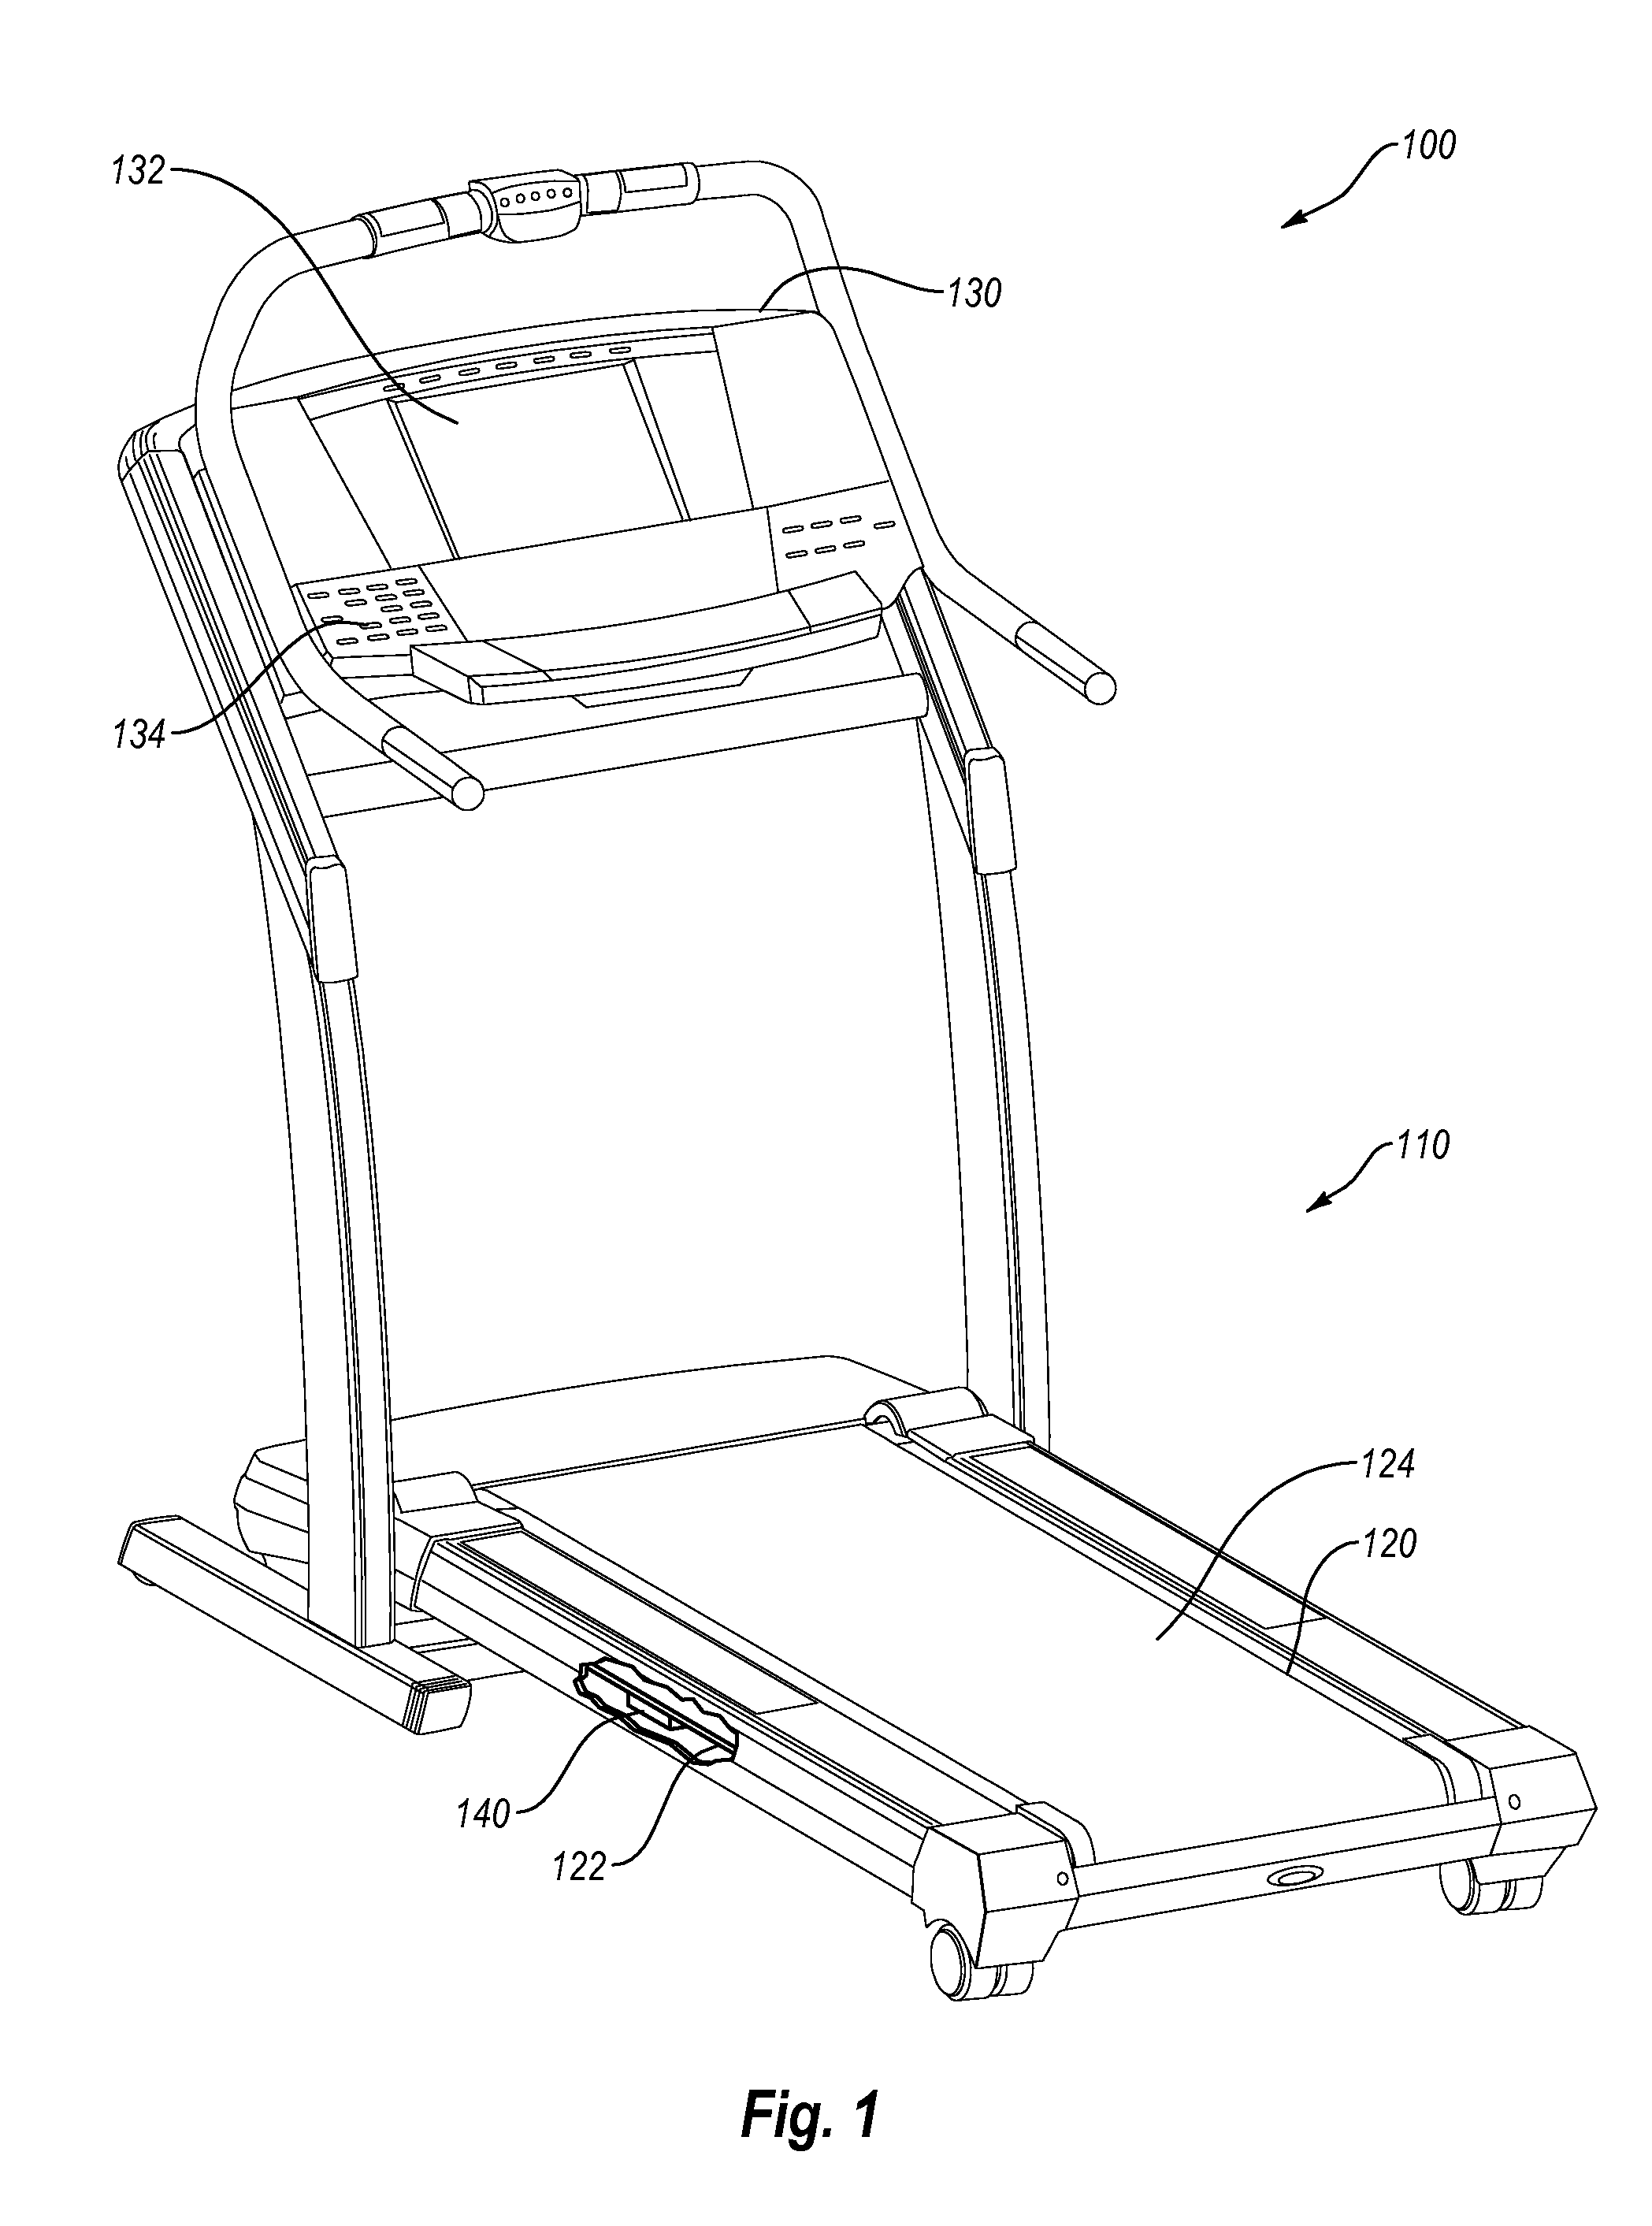 Treadmill with foot fall monitor and cadence display